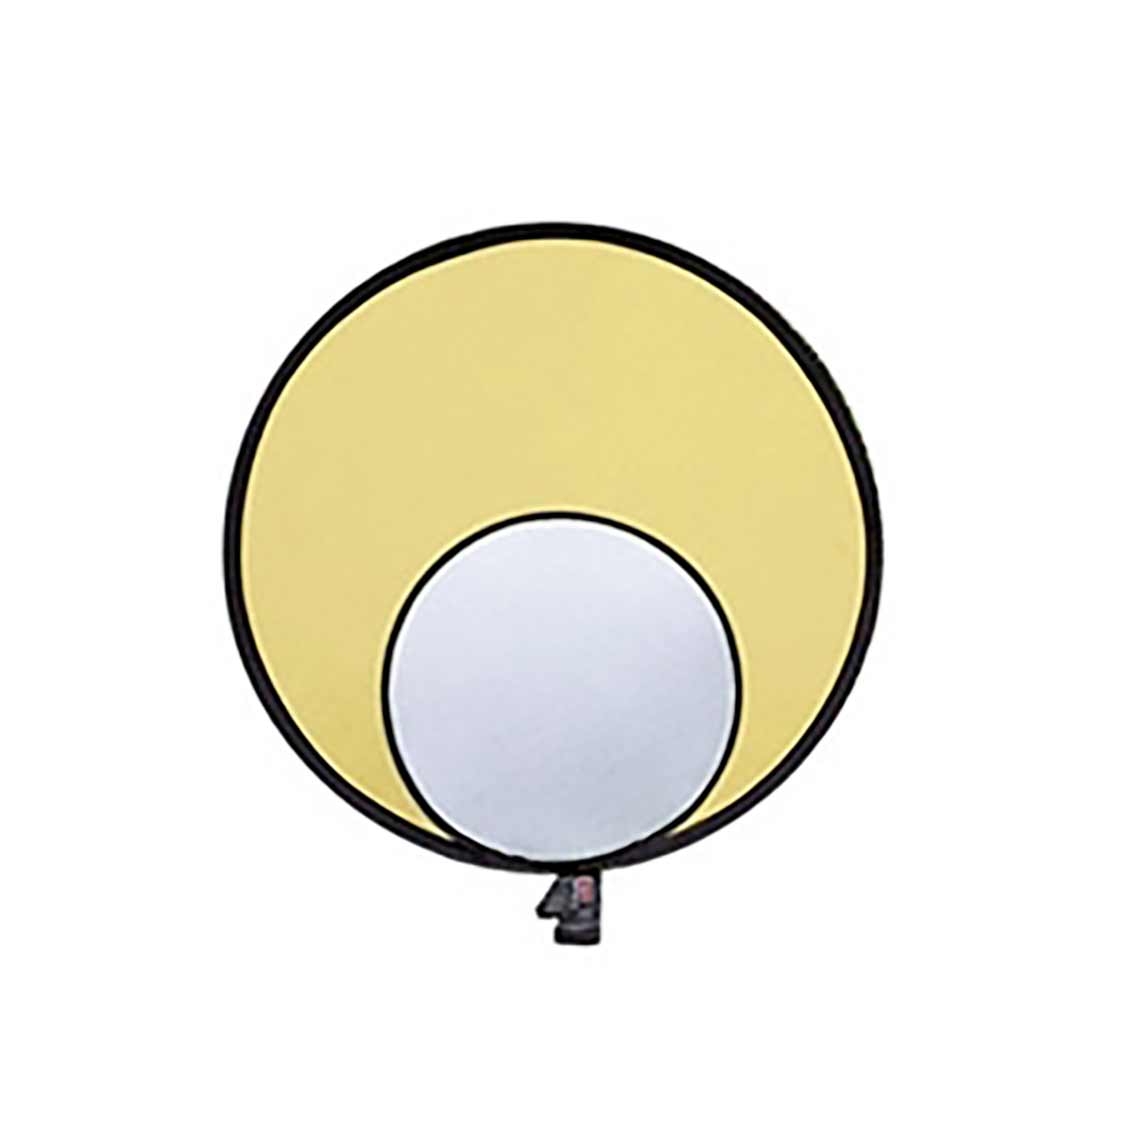 Promaster Reflectadisc 22-inch Silver/Gold